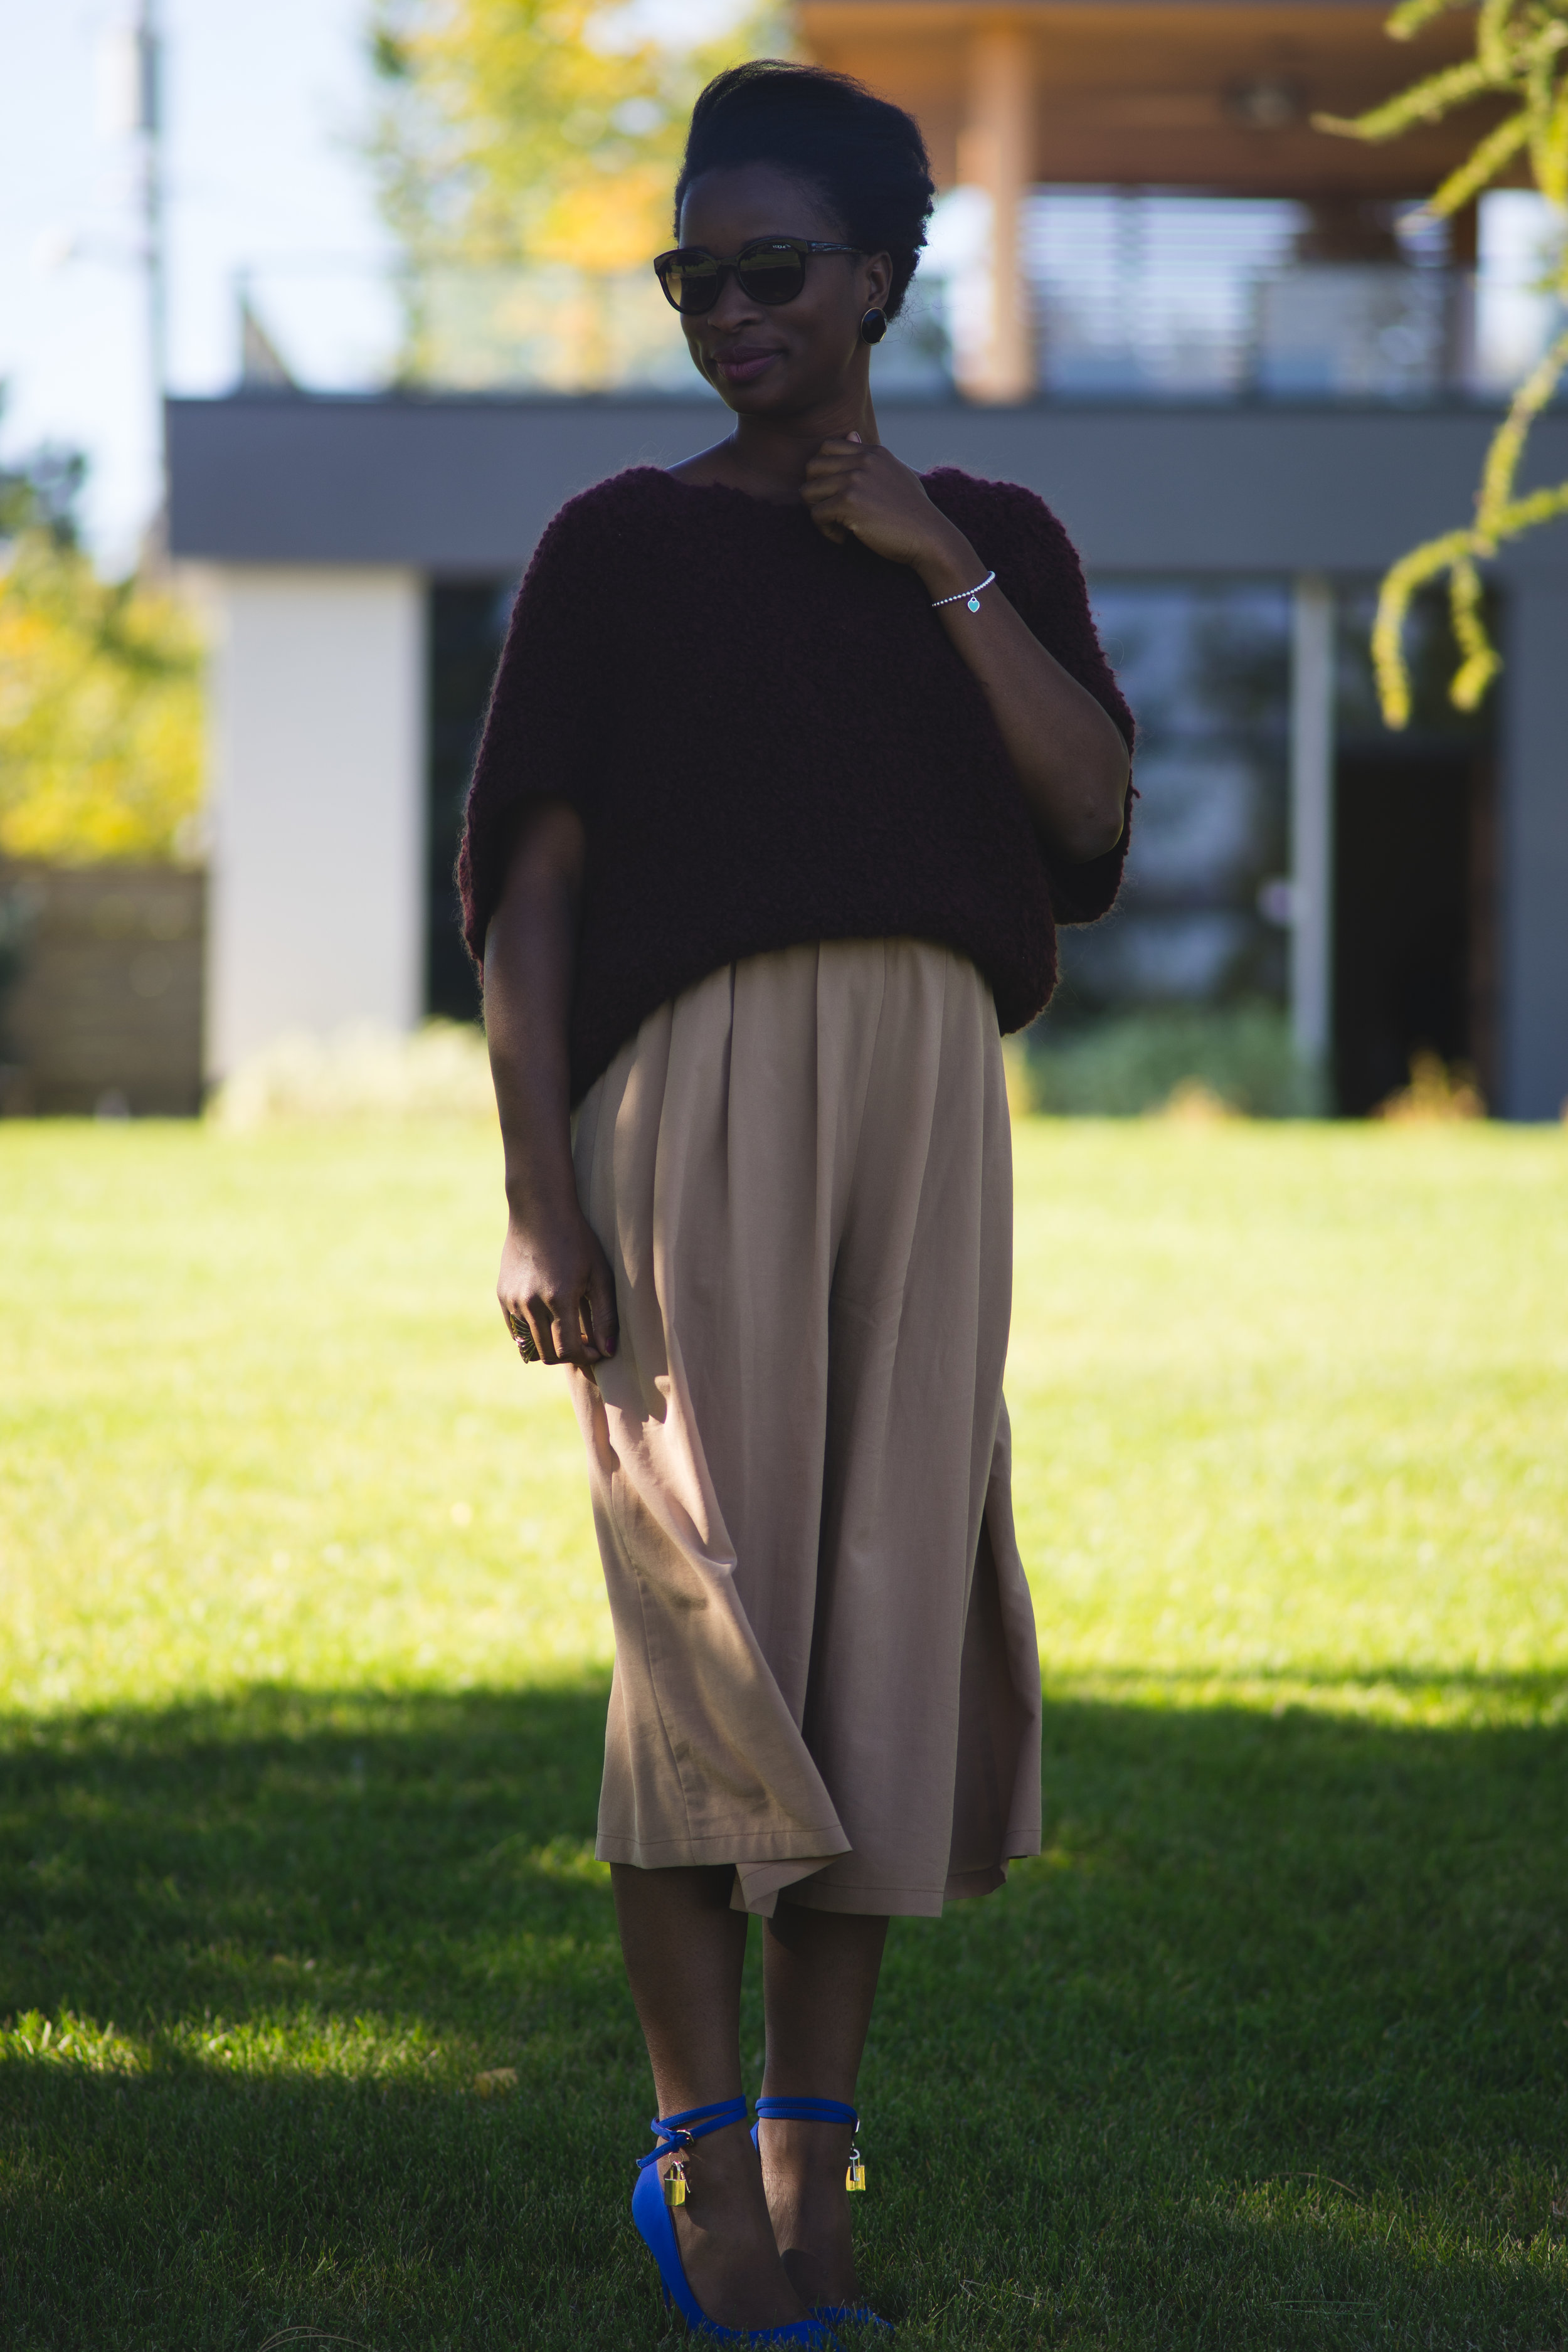  Elegant and sophisticated outfit: personal stylist is Knit Me Up from Calgary Alberta. Burgundy short sleeve sweater, styled with culottes from Japan. Personal stylist Sade Babatunde designed this look with your "typical classy girl" in mind! Very f